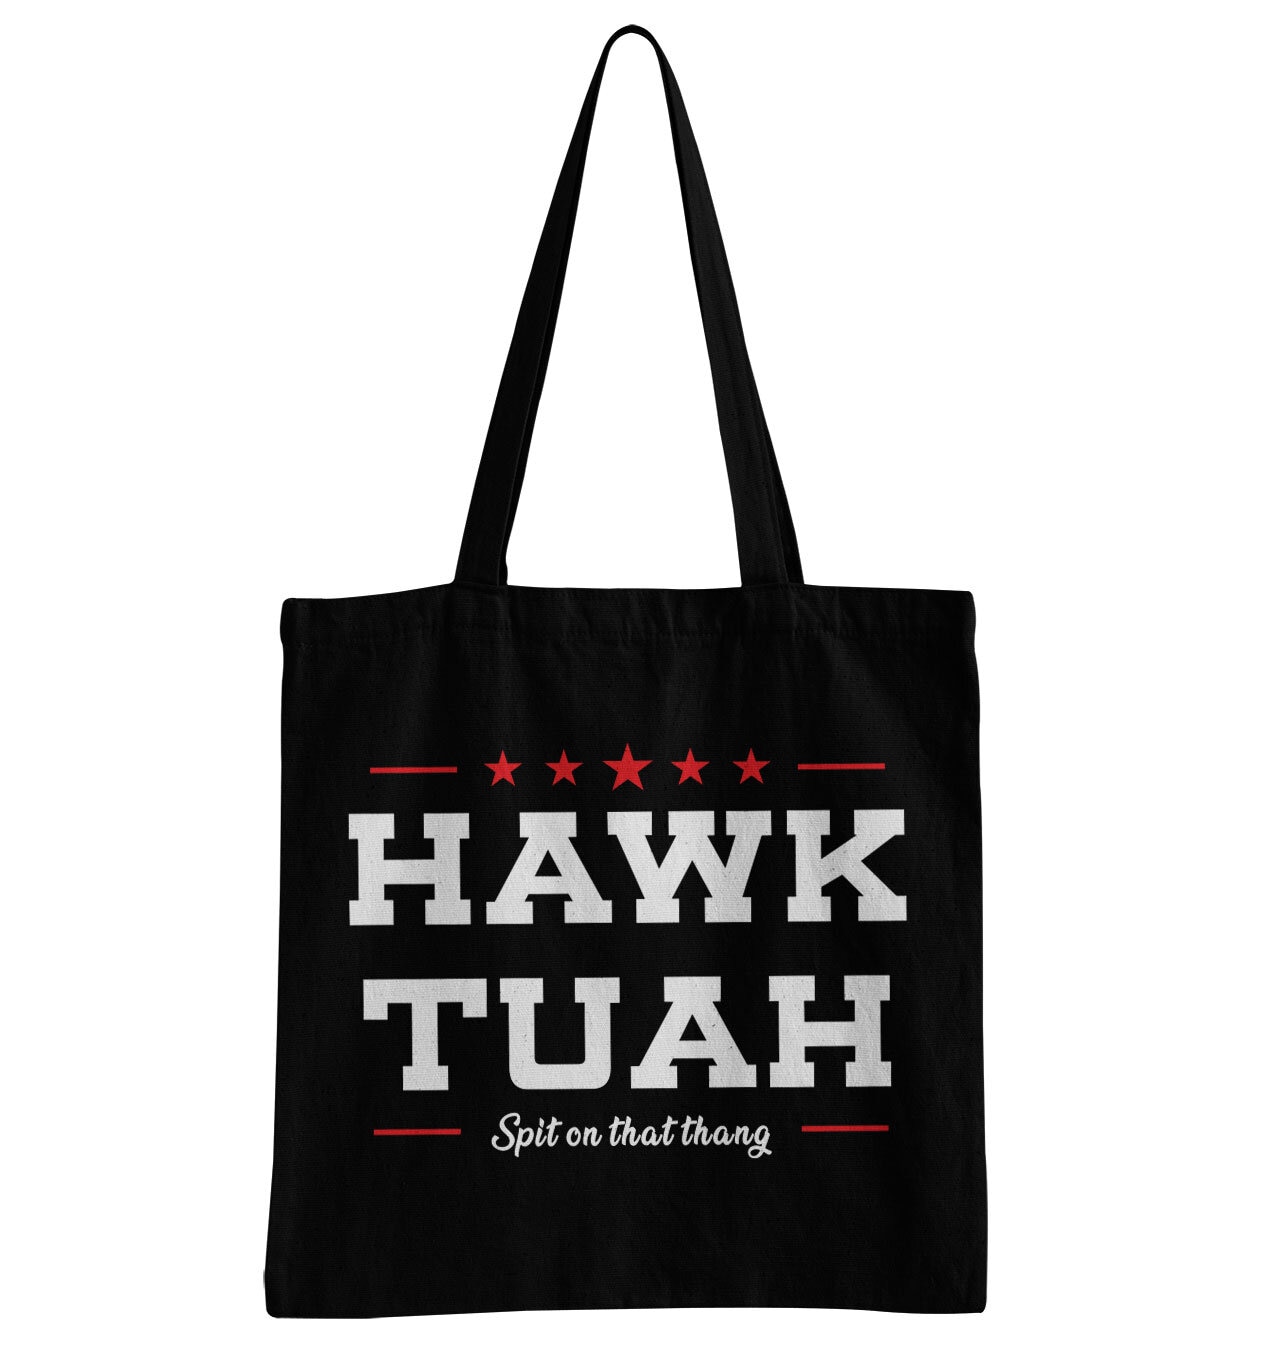 Hawk Tuah - Spit On That Thang Tote Bag